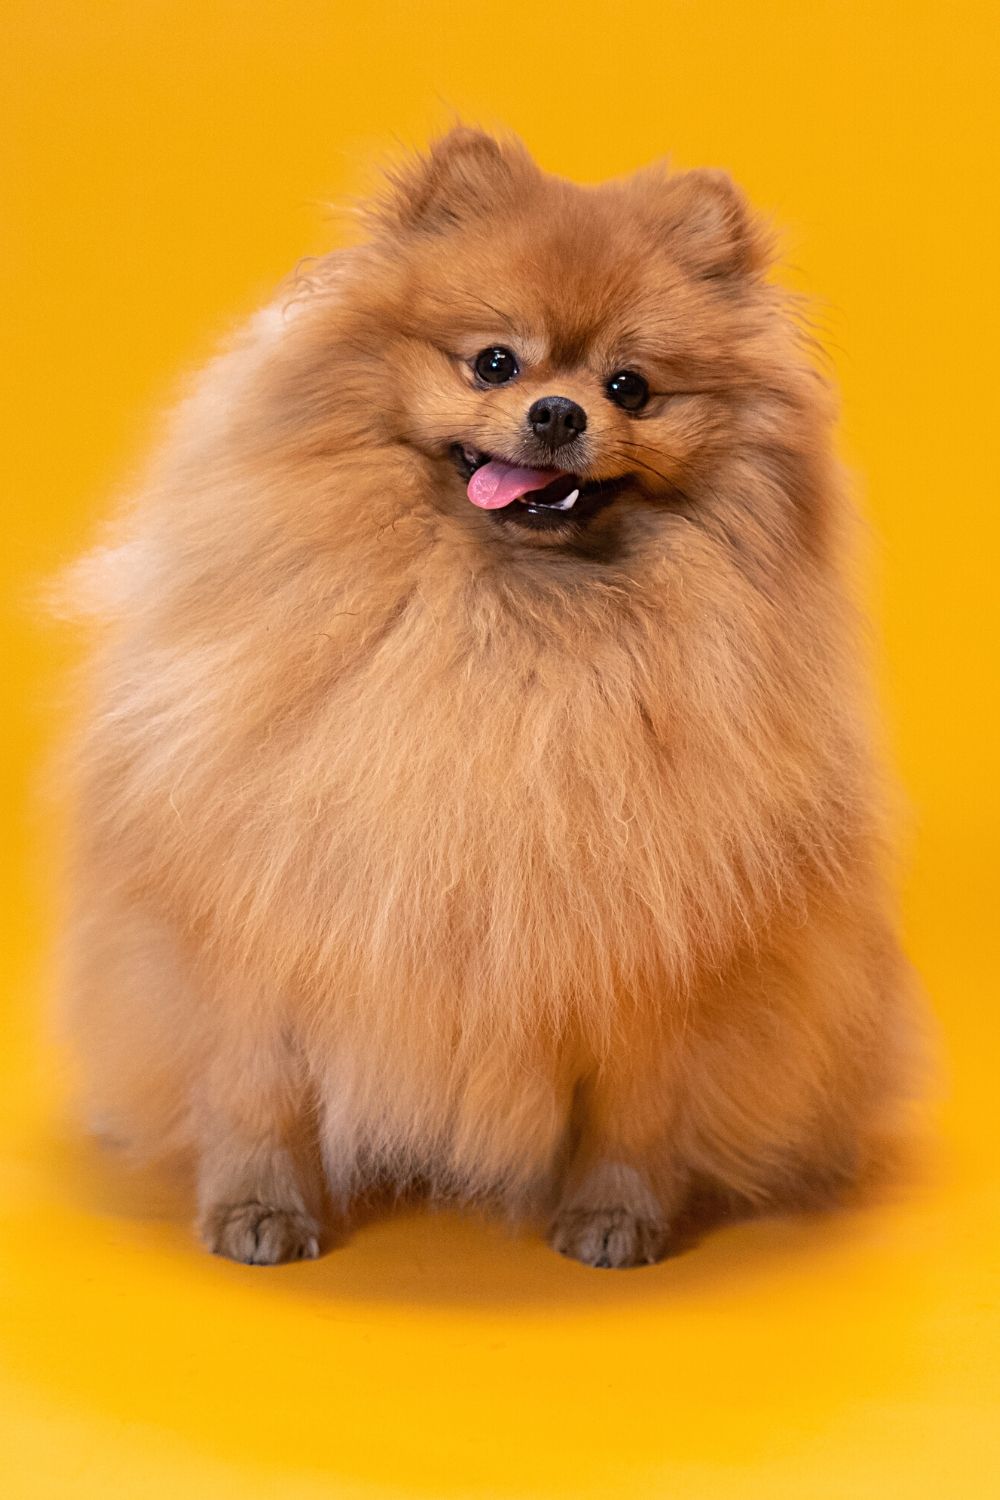 The Pomeranian looks more like the Ewoks from Star Wars as it enters adulthood